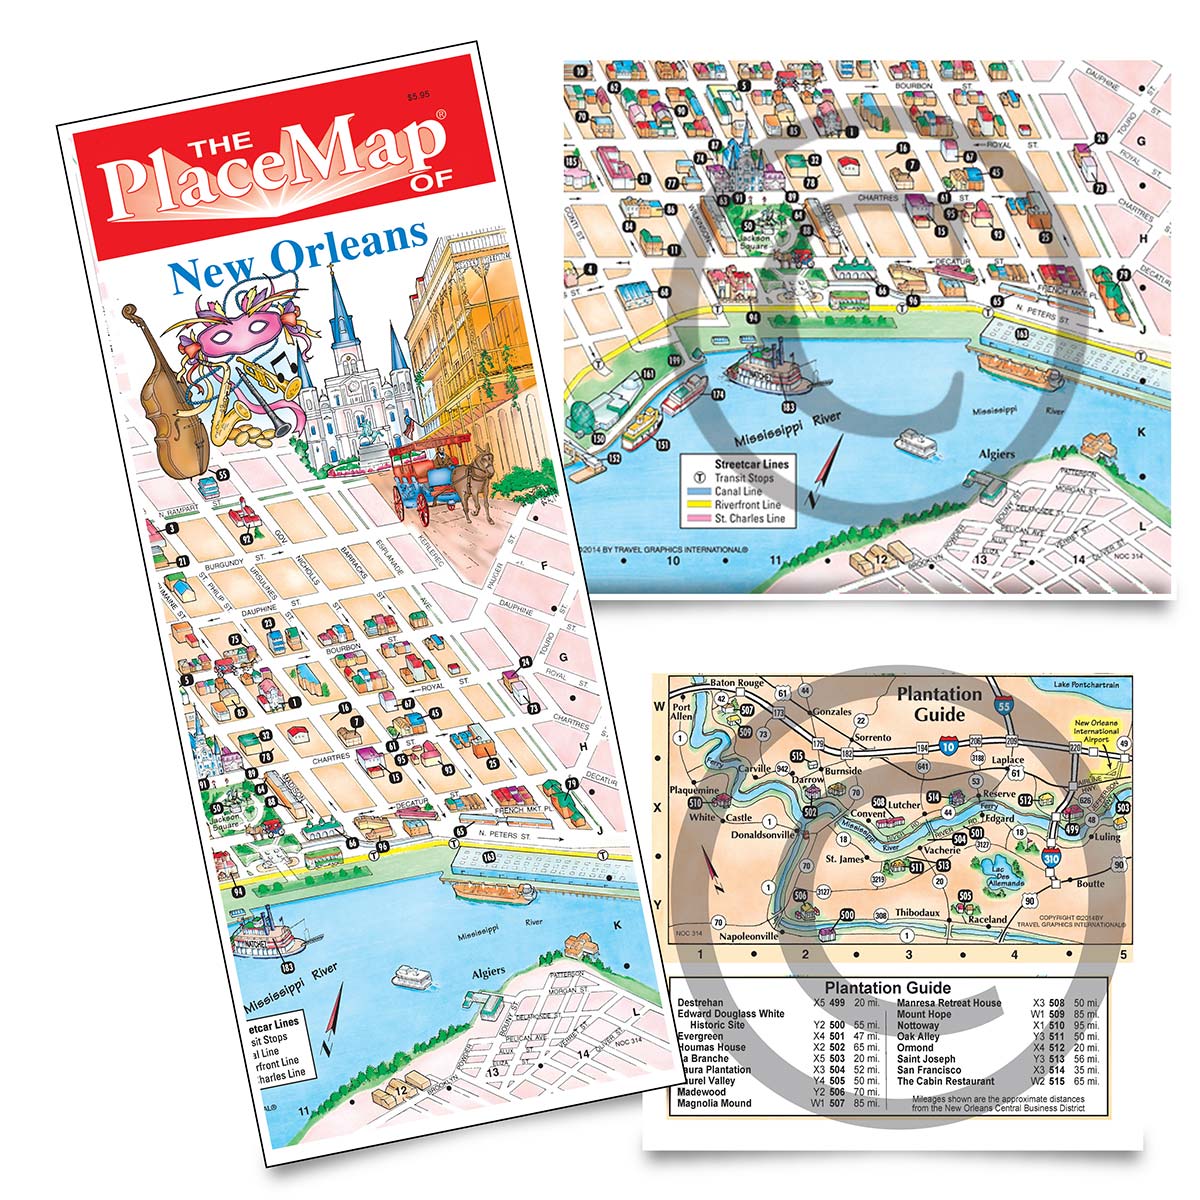 Buy New Orleans Maps Online New Orleans Tourist Maps